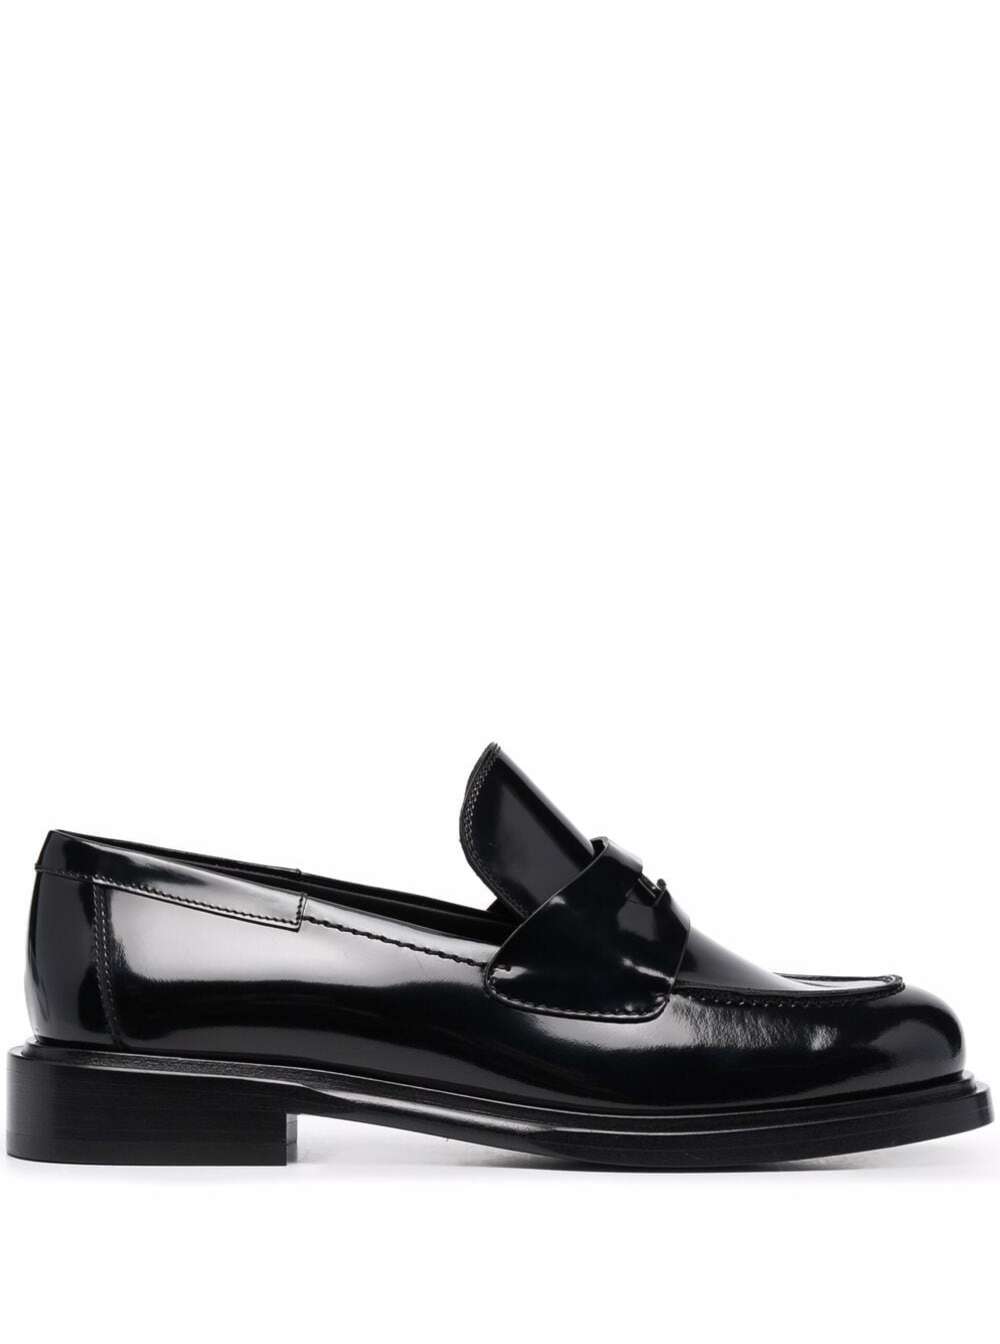 Salvatore Ferragamo Womans Black Penny Glossy Leather Loafers